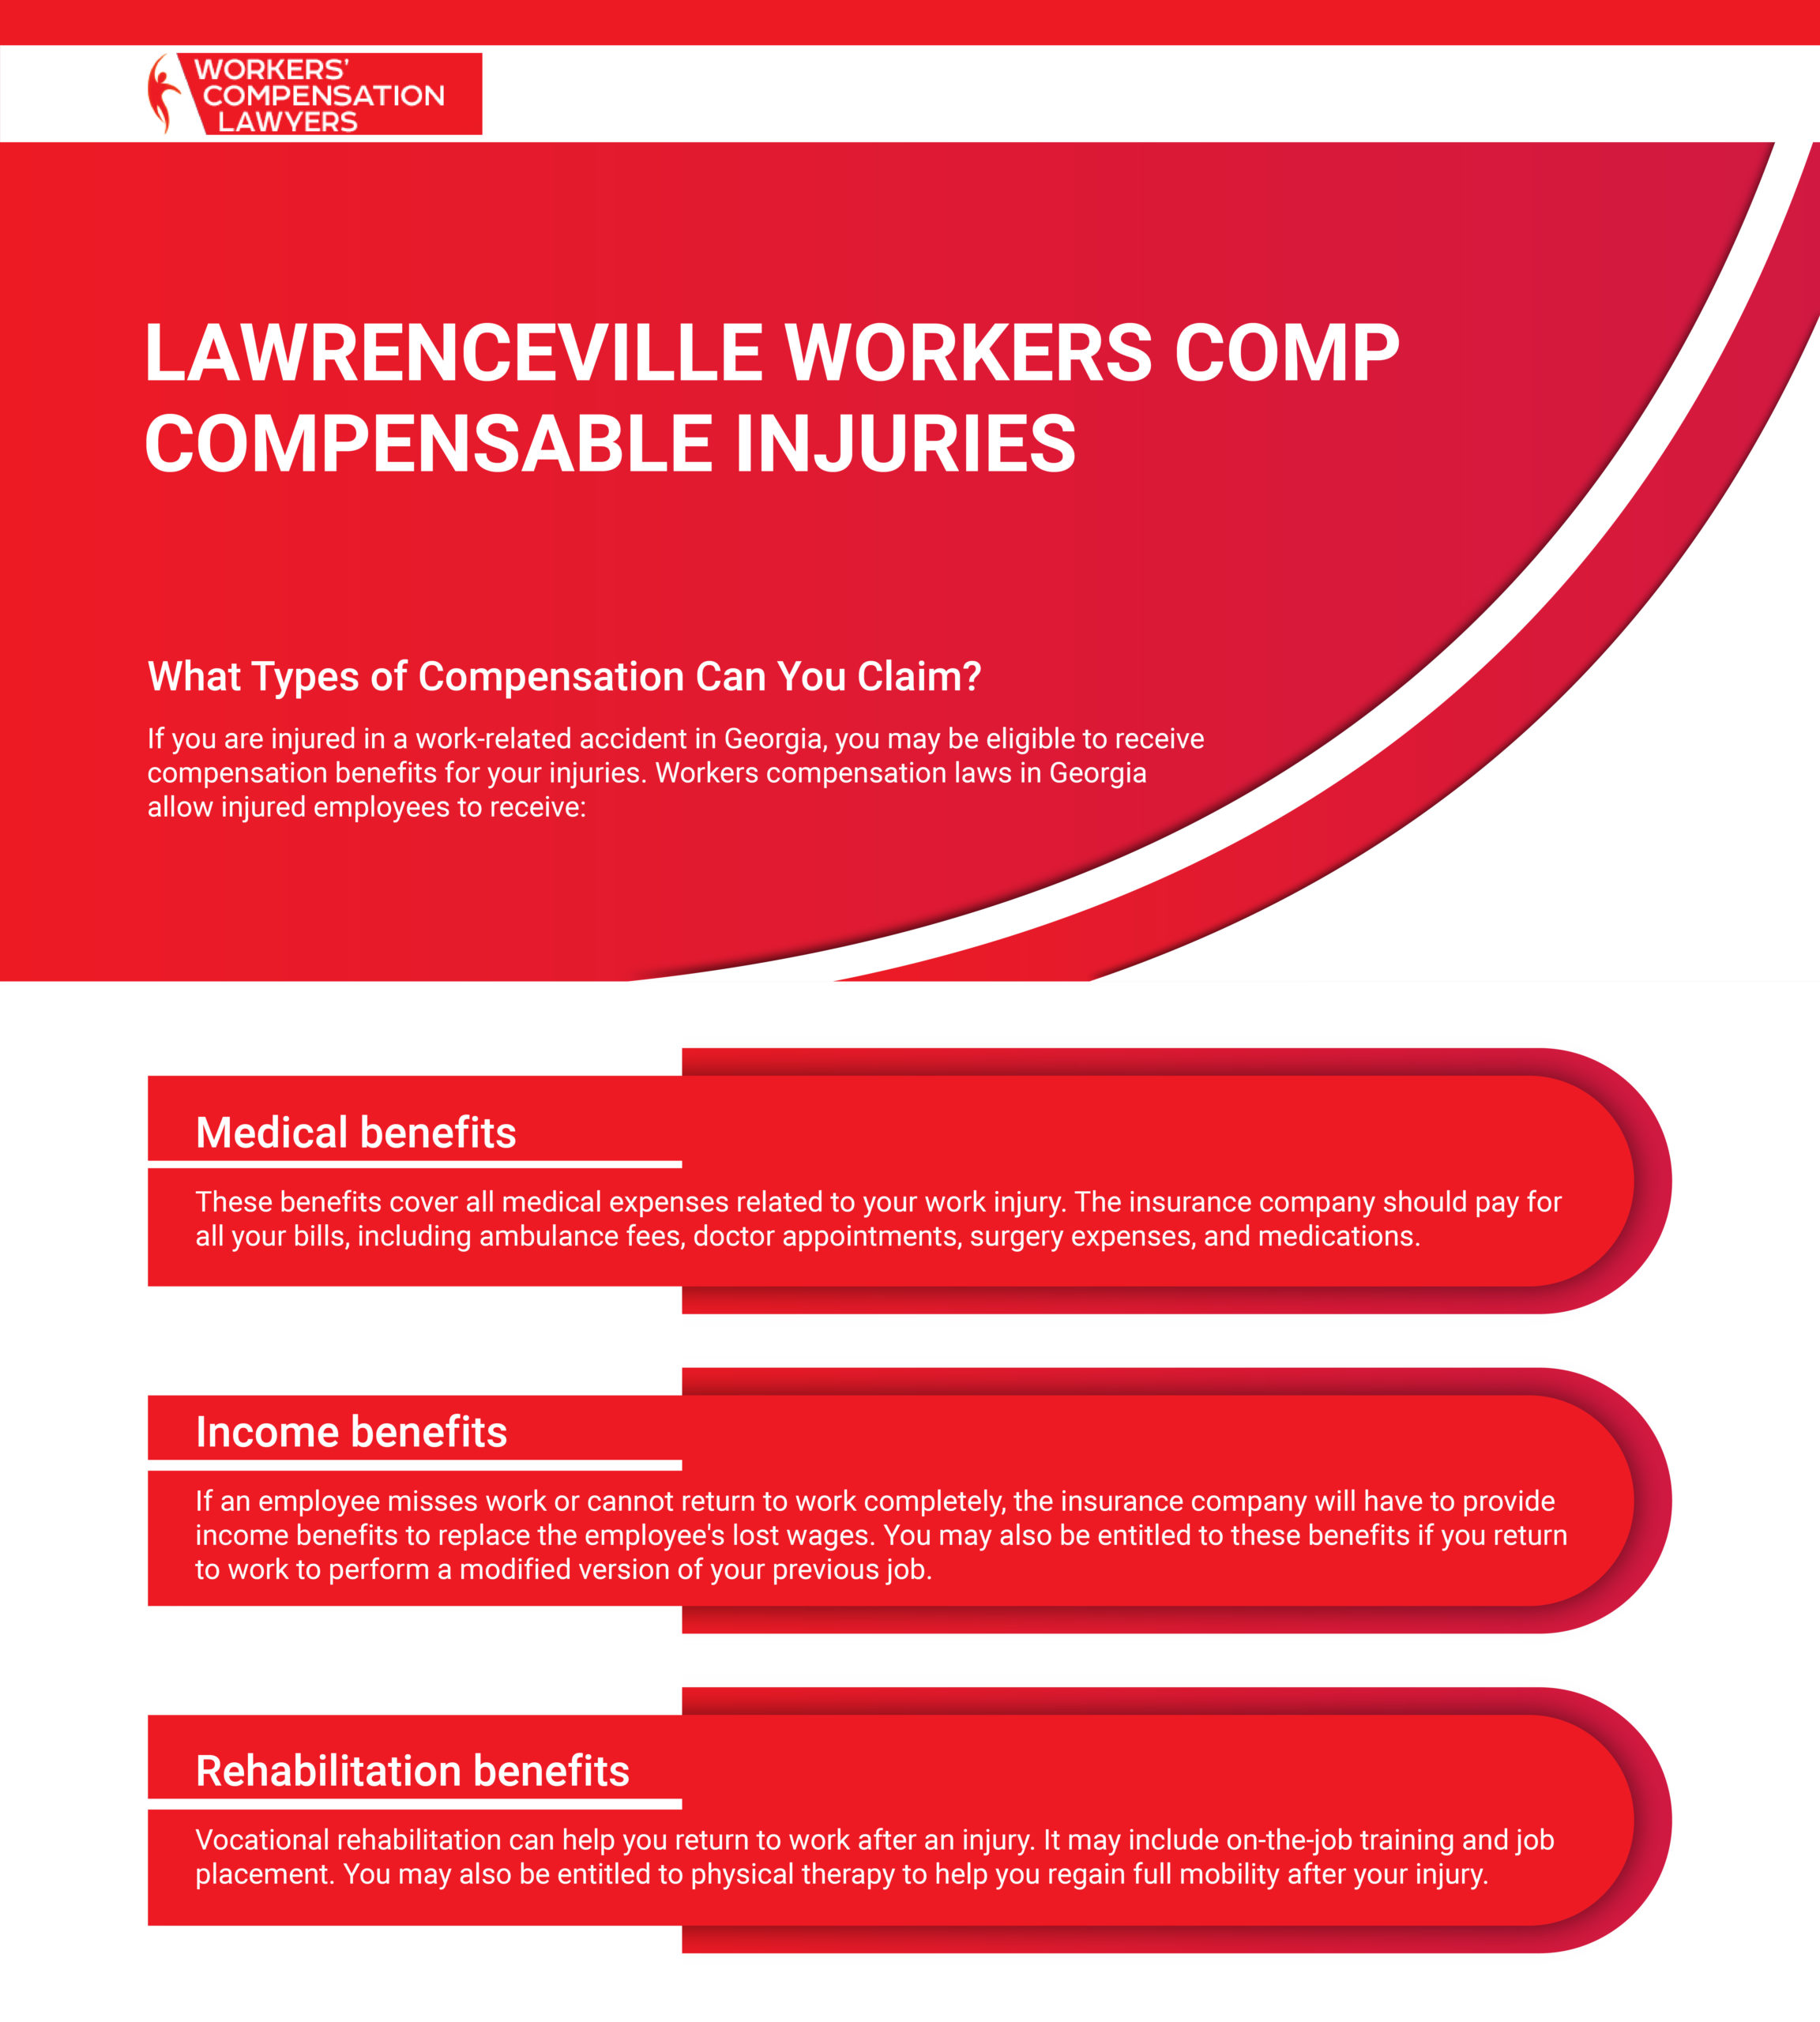 Lawrenceville Workers Compensation Compensable Injury Infographic